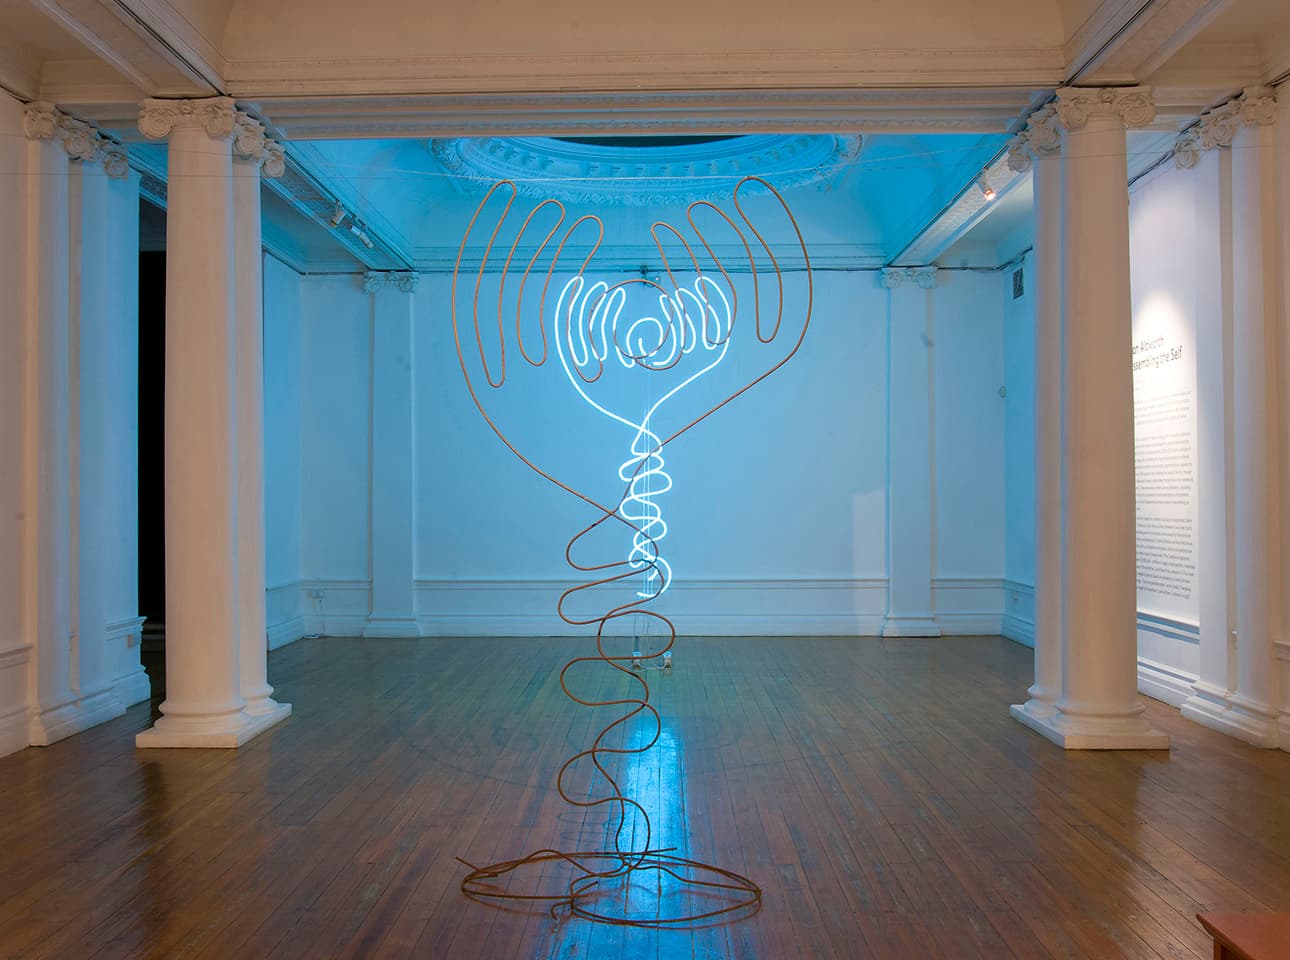 <strong>Guardian in the Presence of Doubt</strong>, neon sculpture by Sarah Blood based on a drawing by Camille Ormston. Commissioned by Susan Aldworth for <i>Reassembling the Self</i>, Hatton Gallery, Newcastle  2012. Photograph by Gavin Duthie.